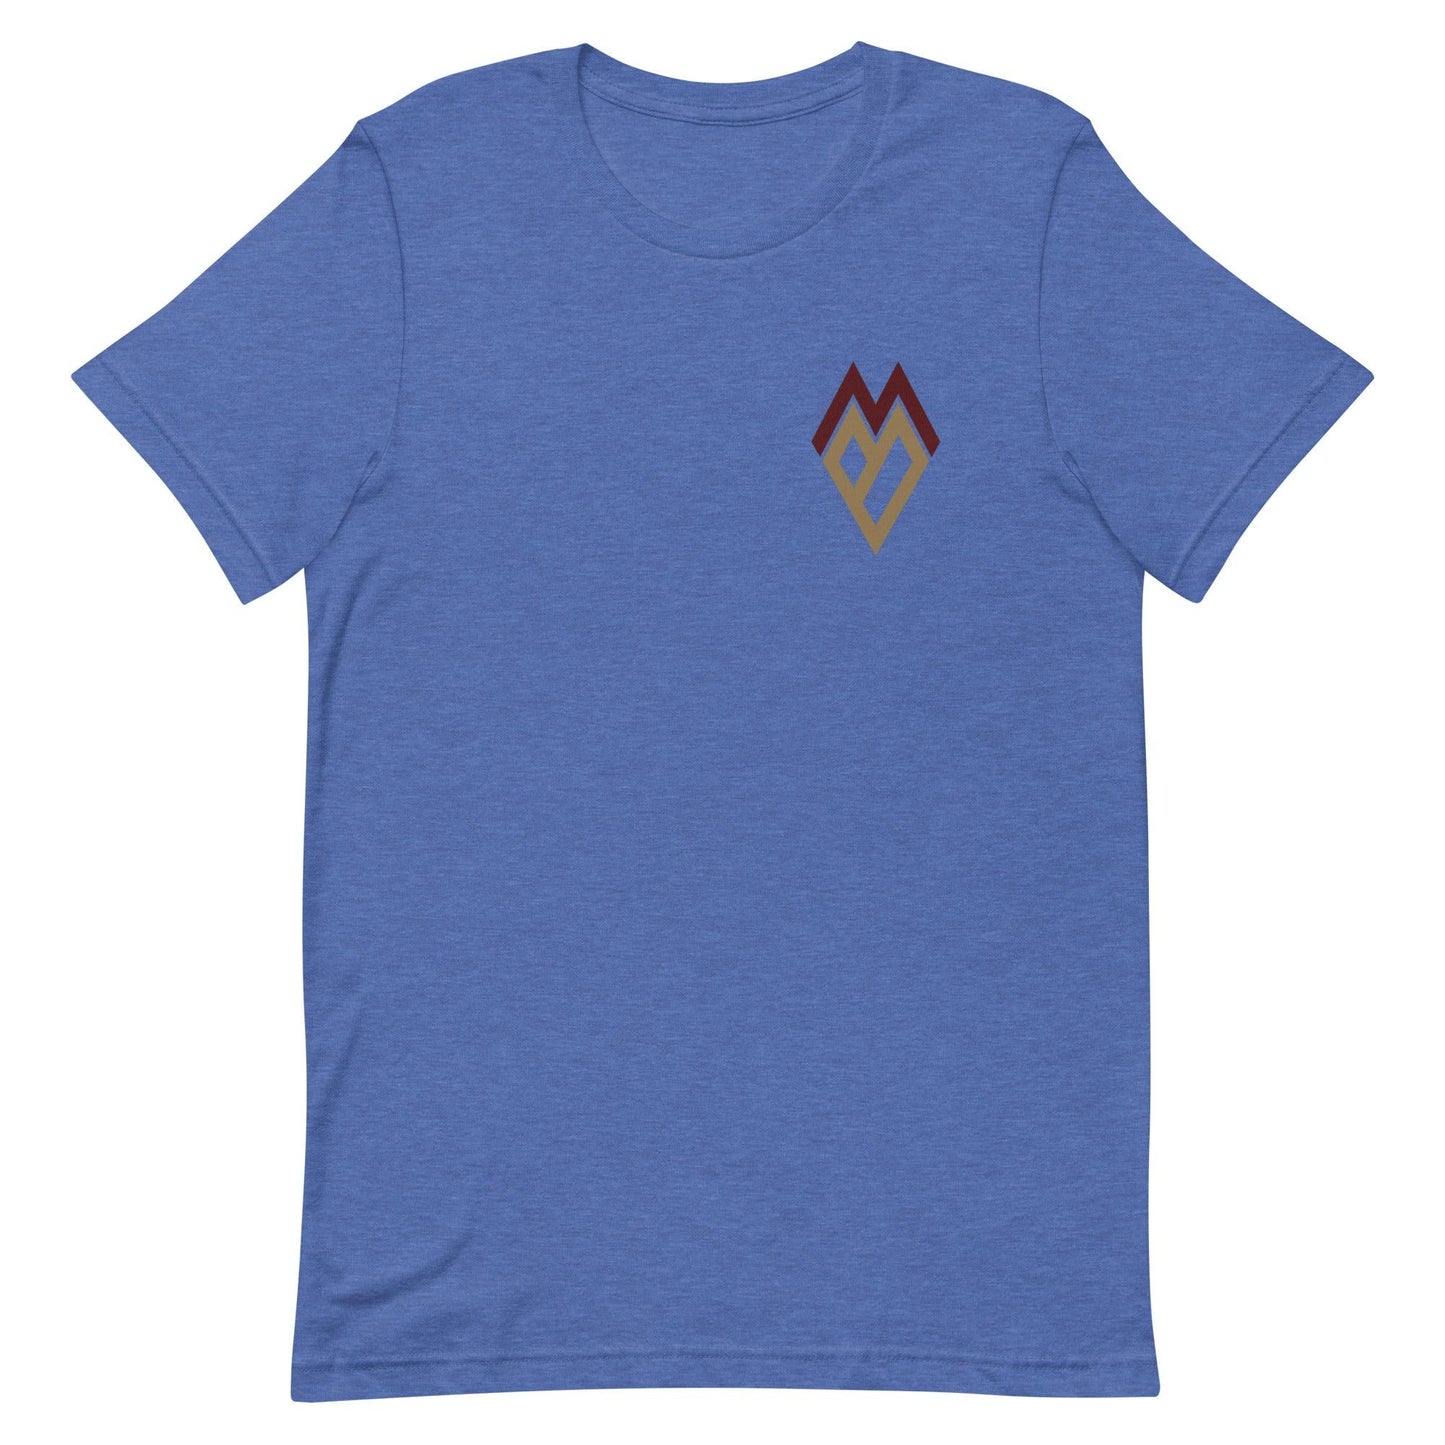 Marcell Barbee "Essential" t-shirt - Fan Arch